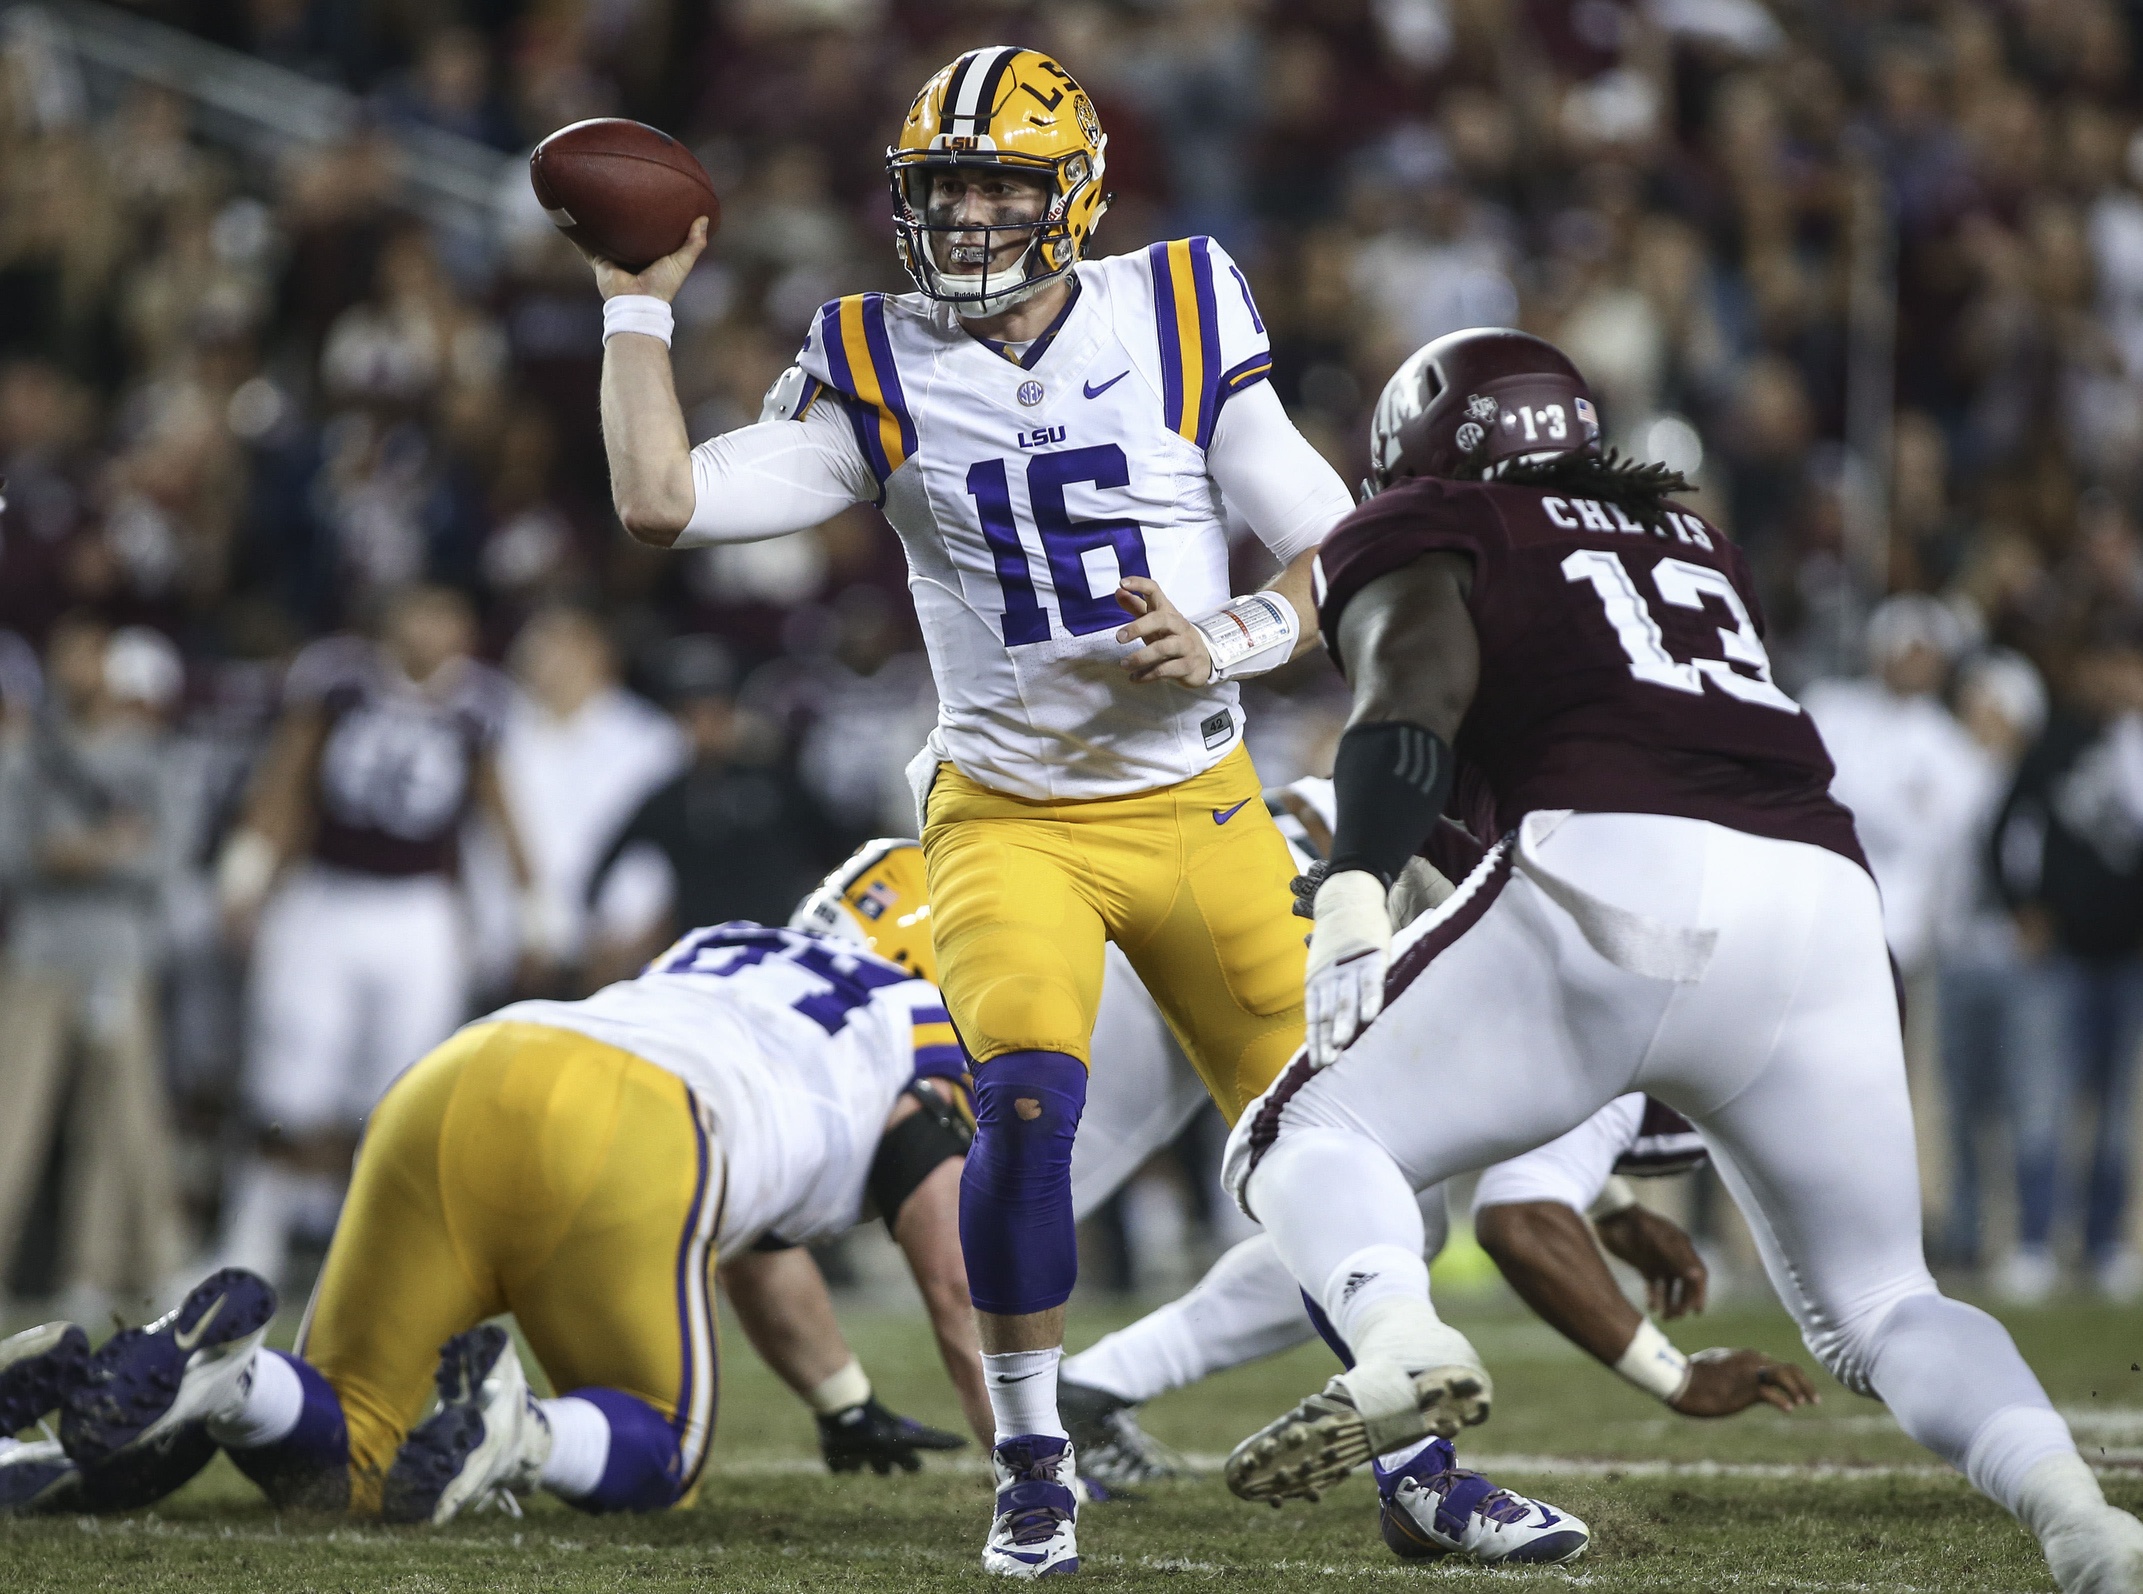 Nov 24, 2016; College Station, TX, USA; LSU Tigers quarterback Danny Etling (16) attempts a pass during the second quarter against the Texas A&M Aggies at Kyle Field. Mandatory Credit: Troy Taormina-USA TODAY Sports